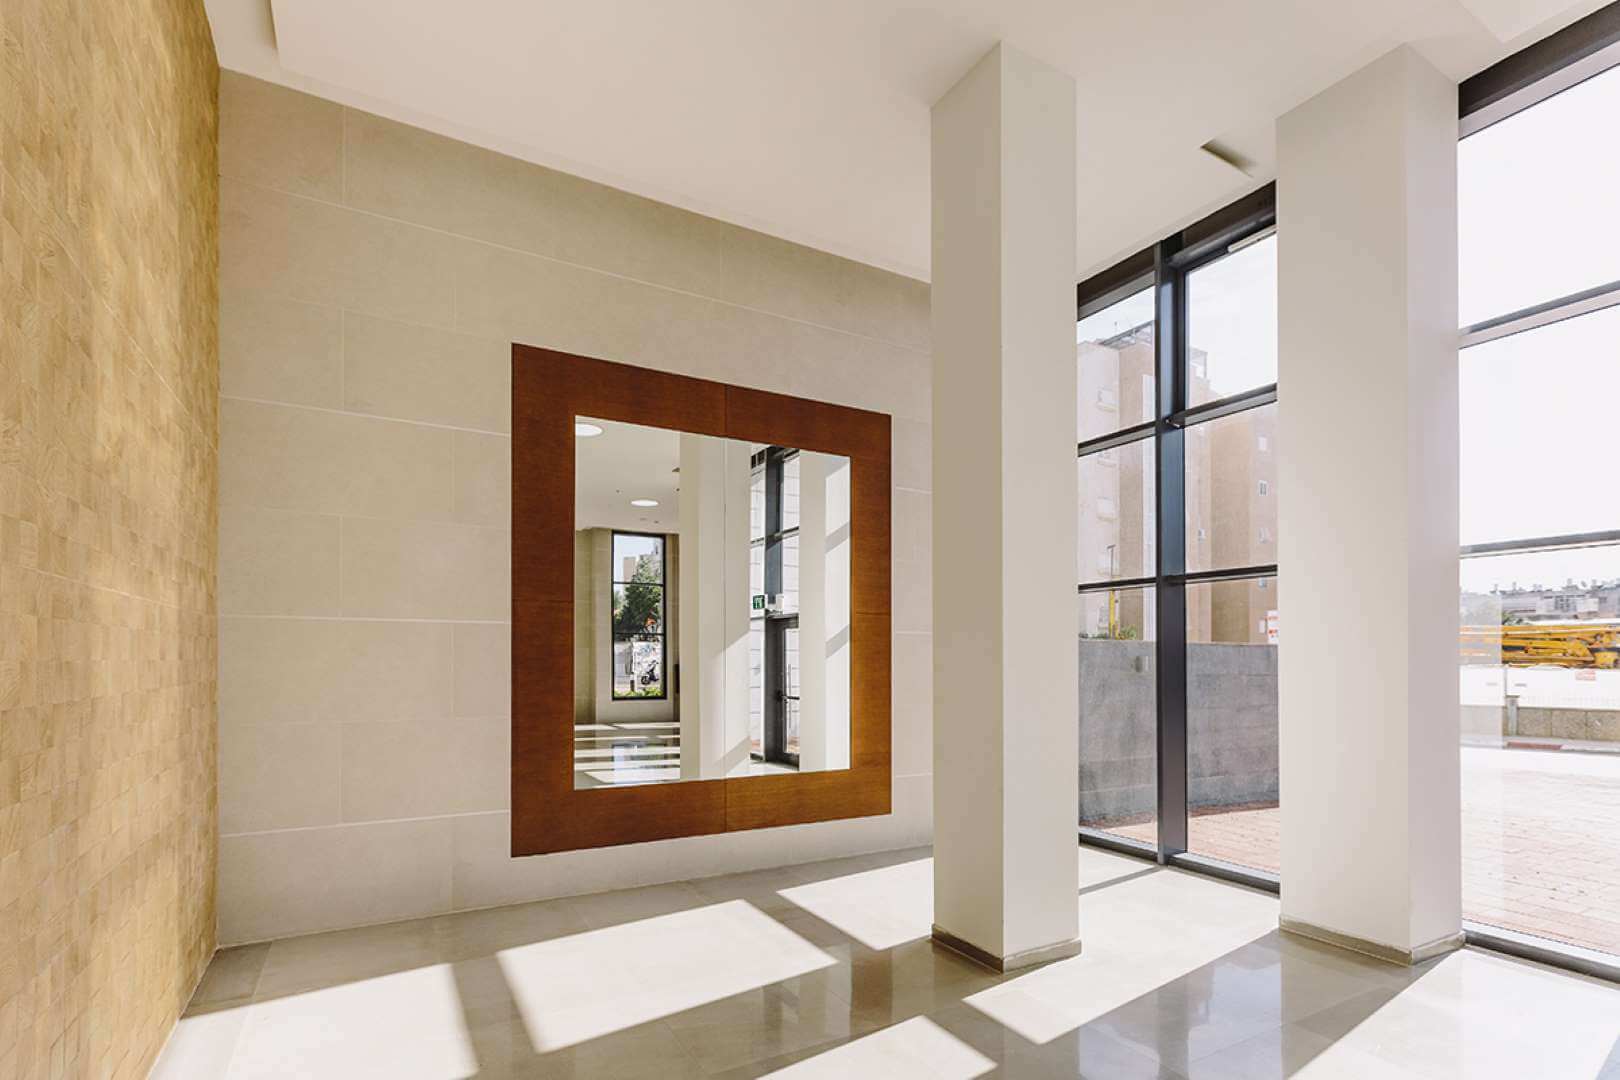 Photograph of the lobby space of a building from the UNIK ALPHA project in Ramat Gan